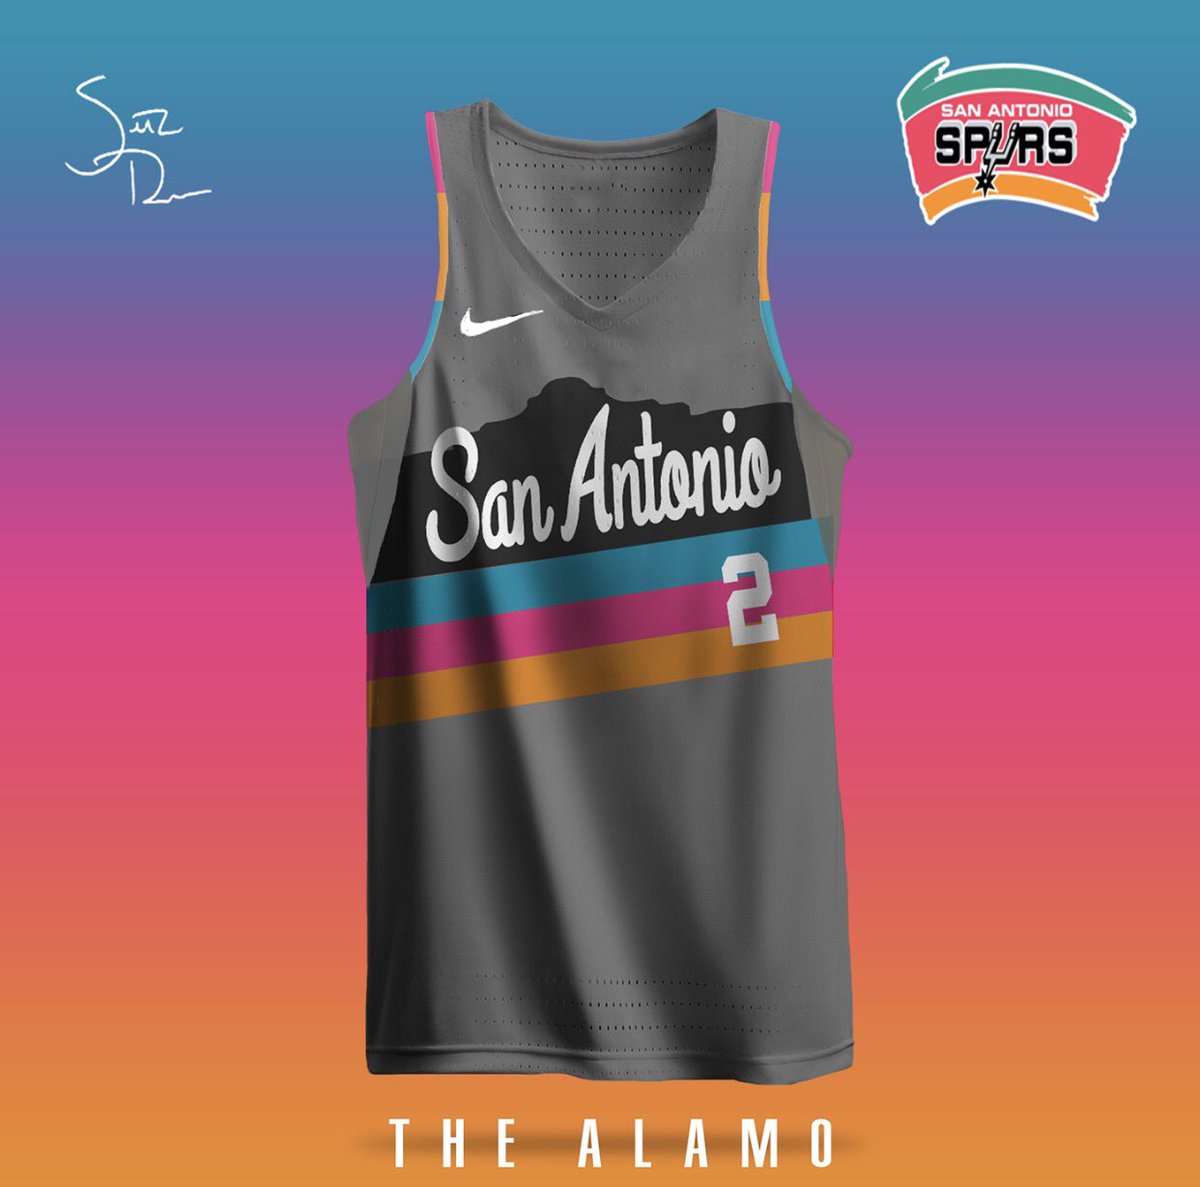 spurs jersey redesign - love the spurs' fiesta colors so made that the  focal point, along with the alamo & an updated logo